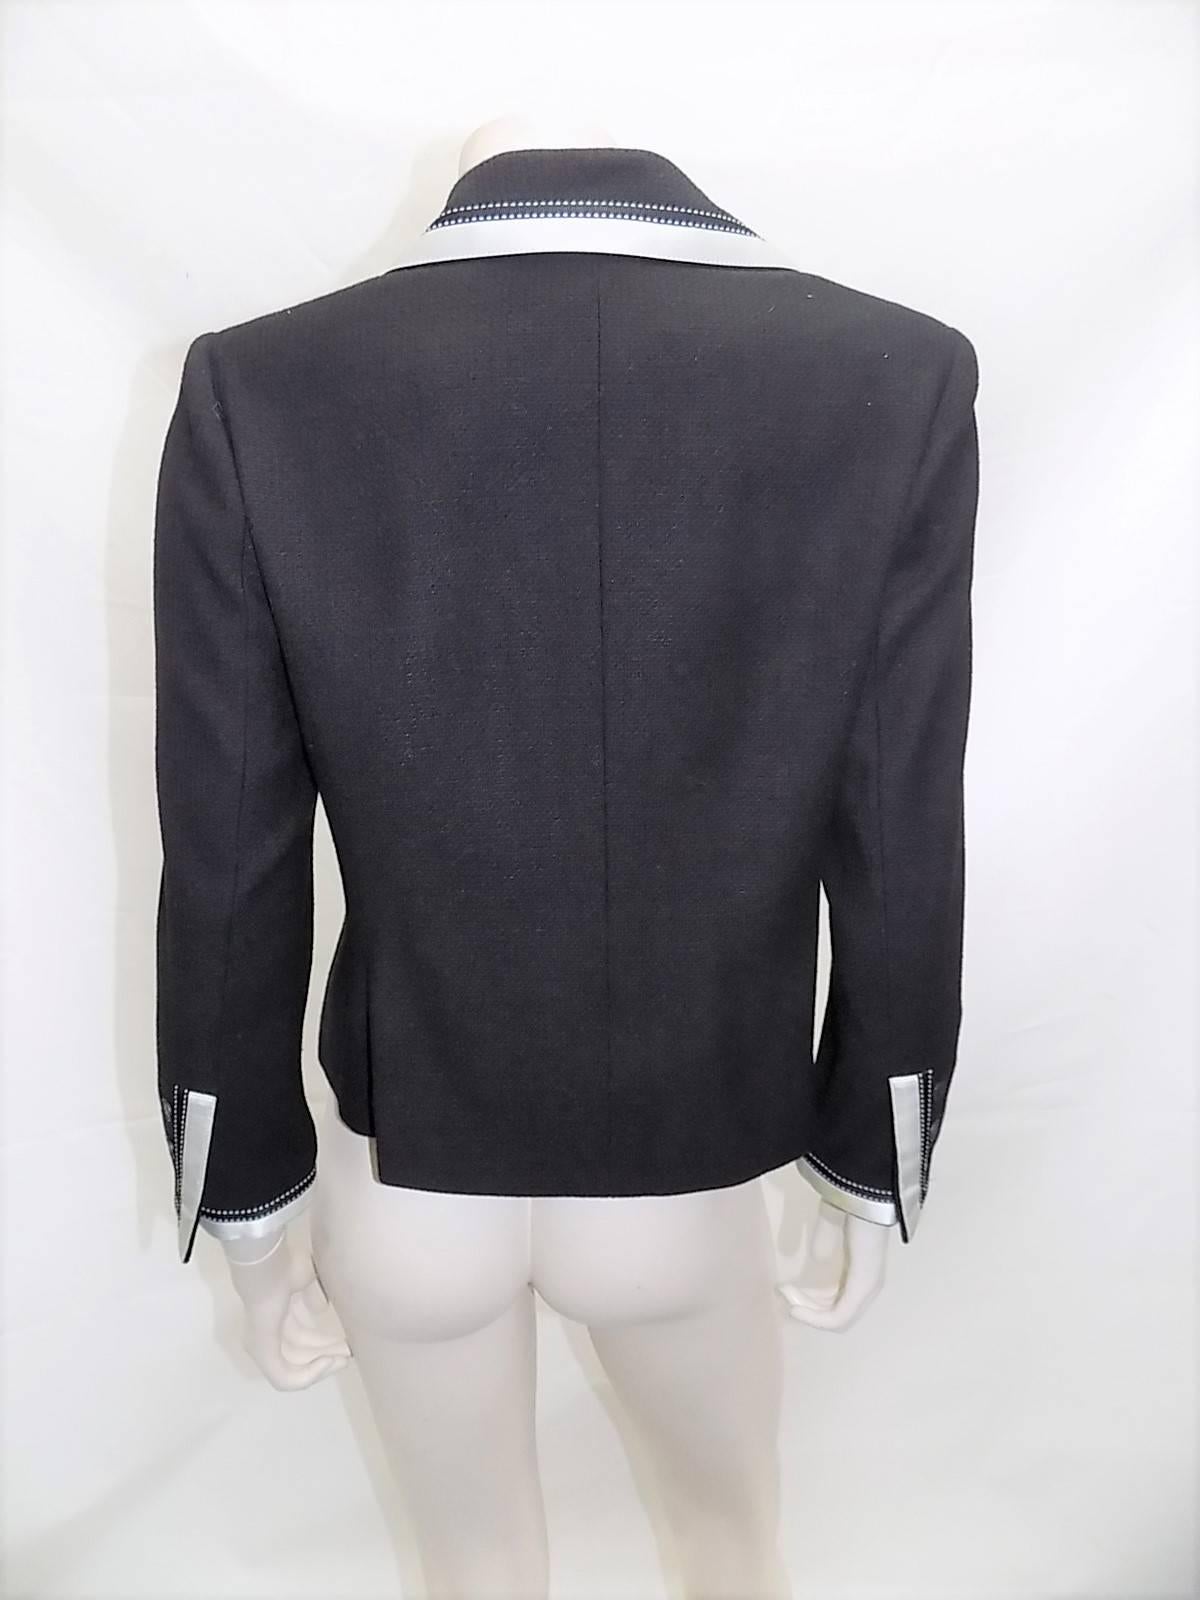 Beautiful black wool and silk blend jacket . Perfect for evening White silk trim  with white stitching  details .Three front buttons closure with Coco Chanel buttons. Two front patch pockets. . silk lining and silver metal bottom chain. Pristine